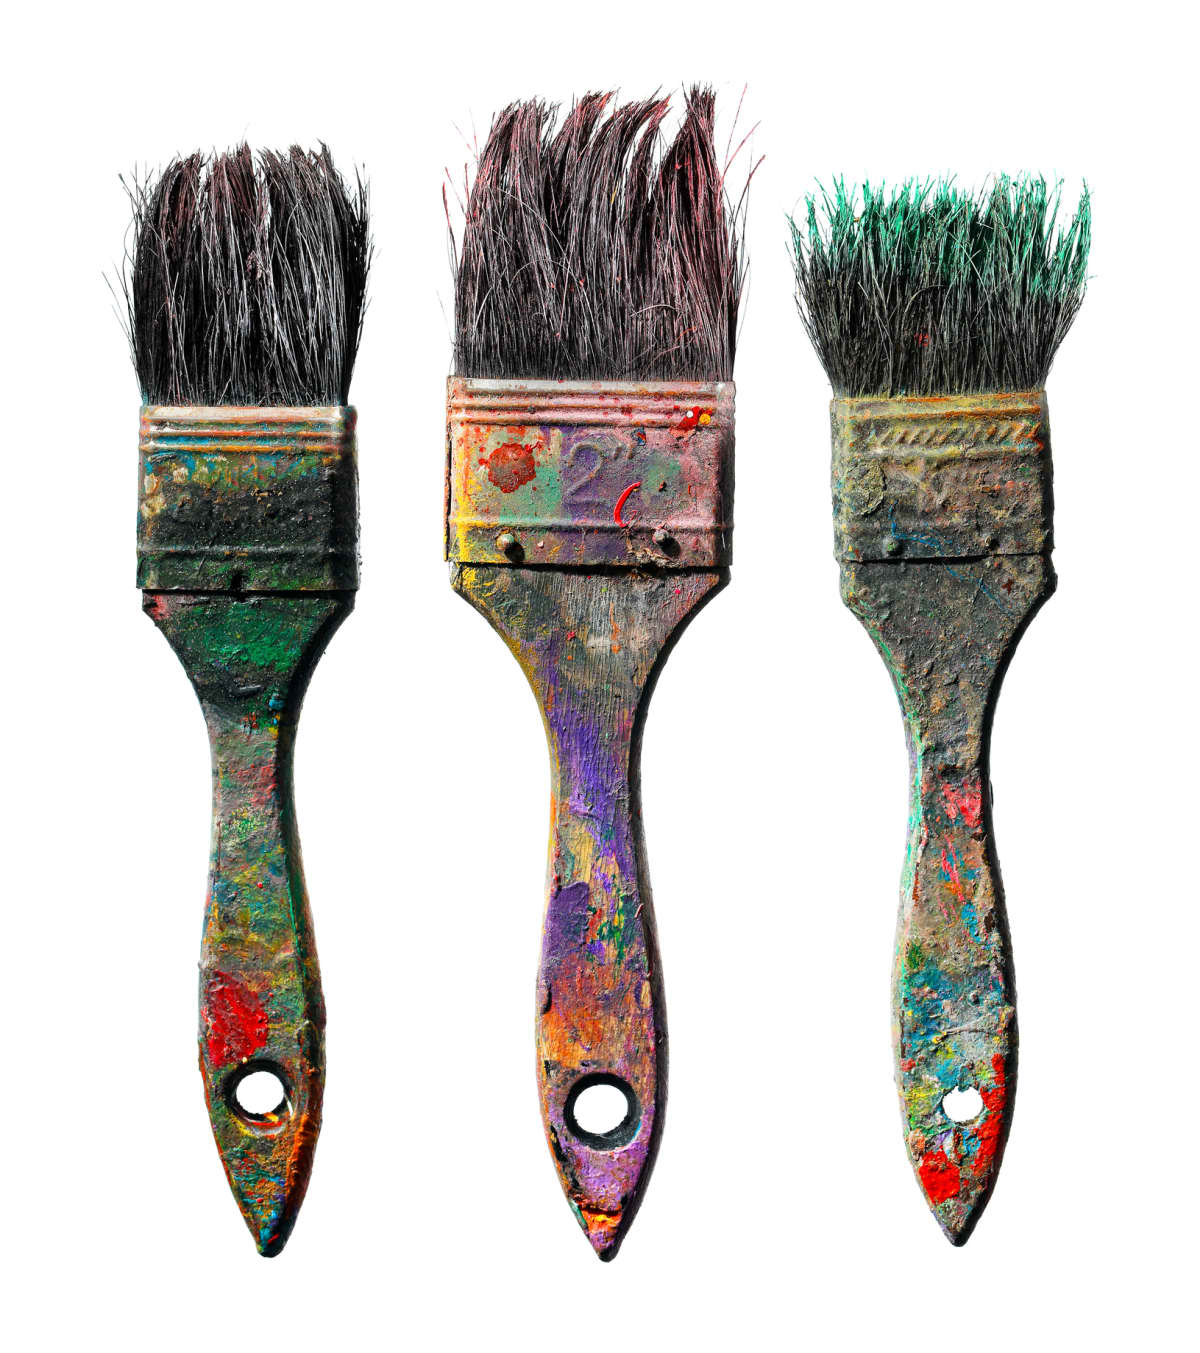 Dirty paint brushes on a white background